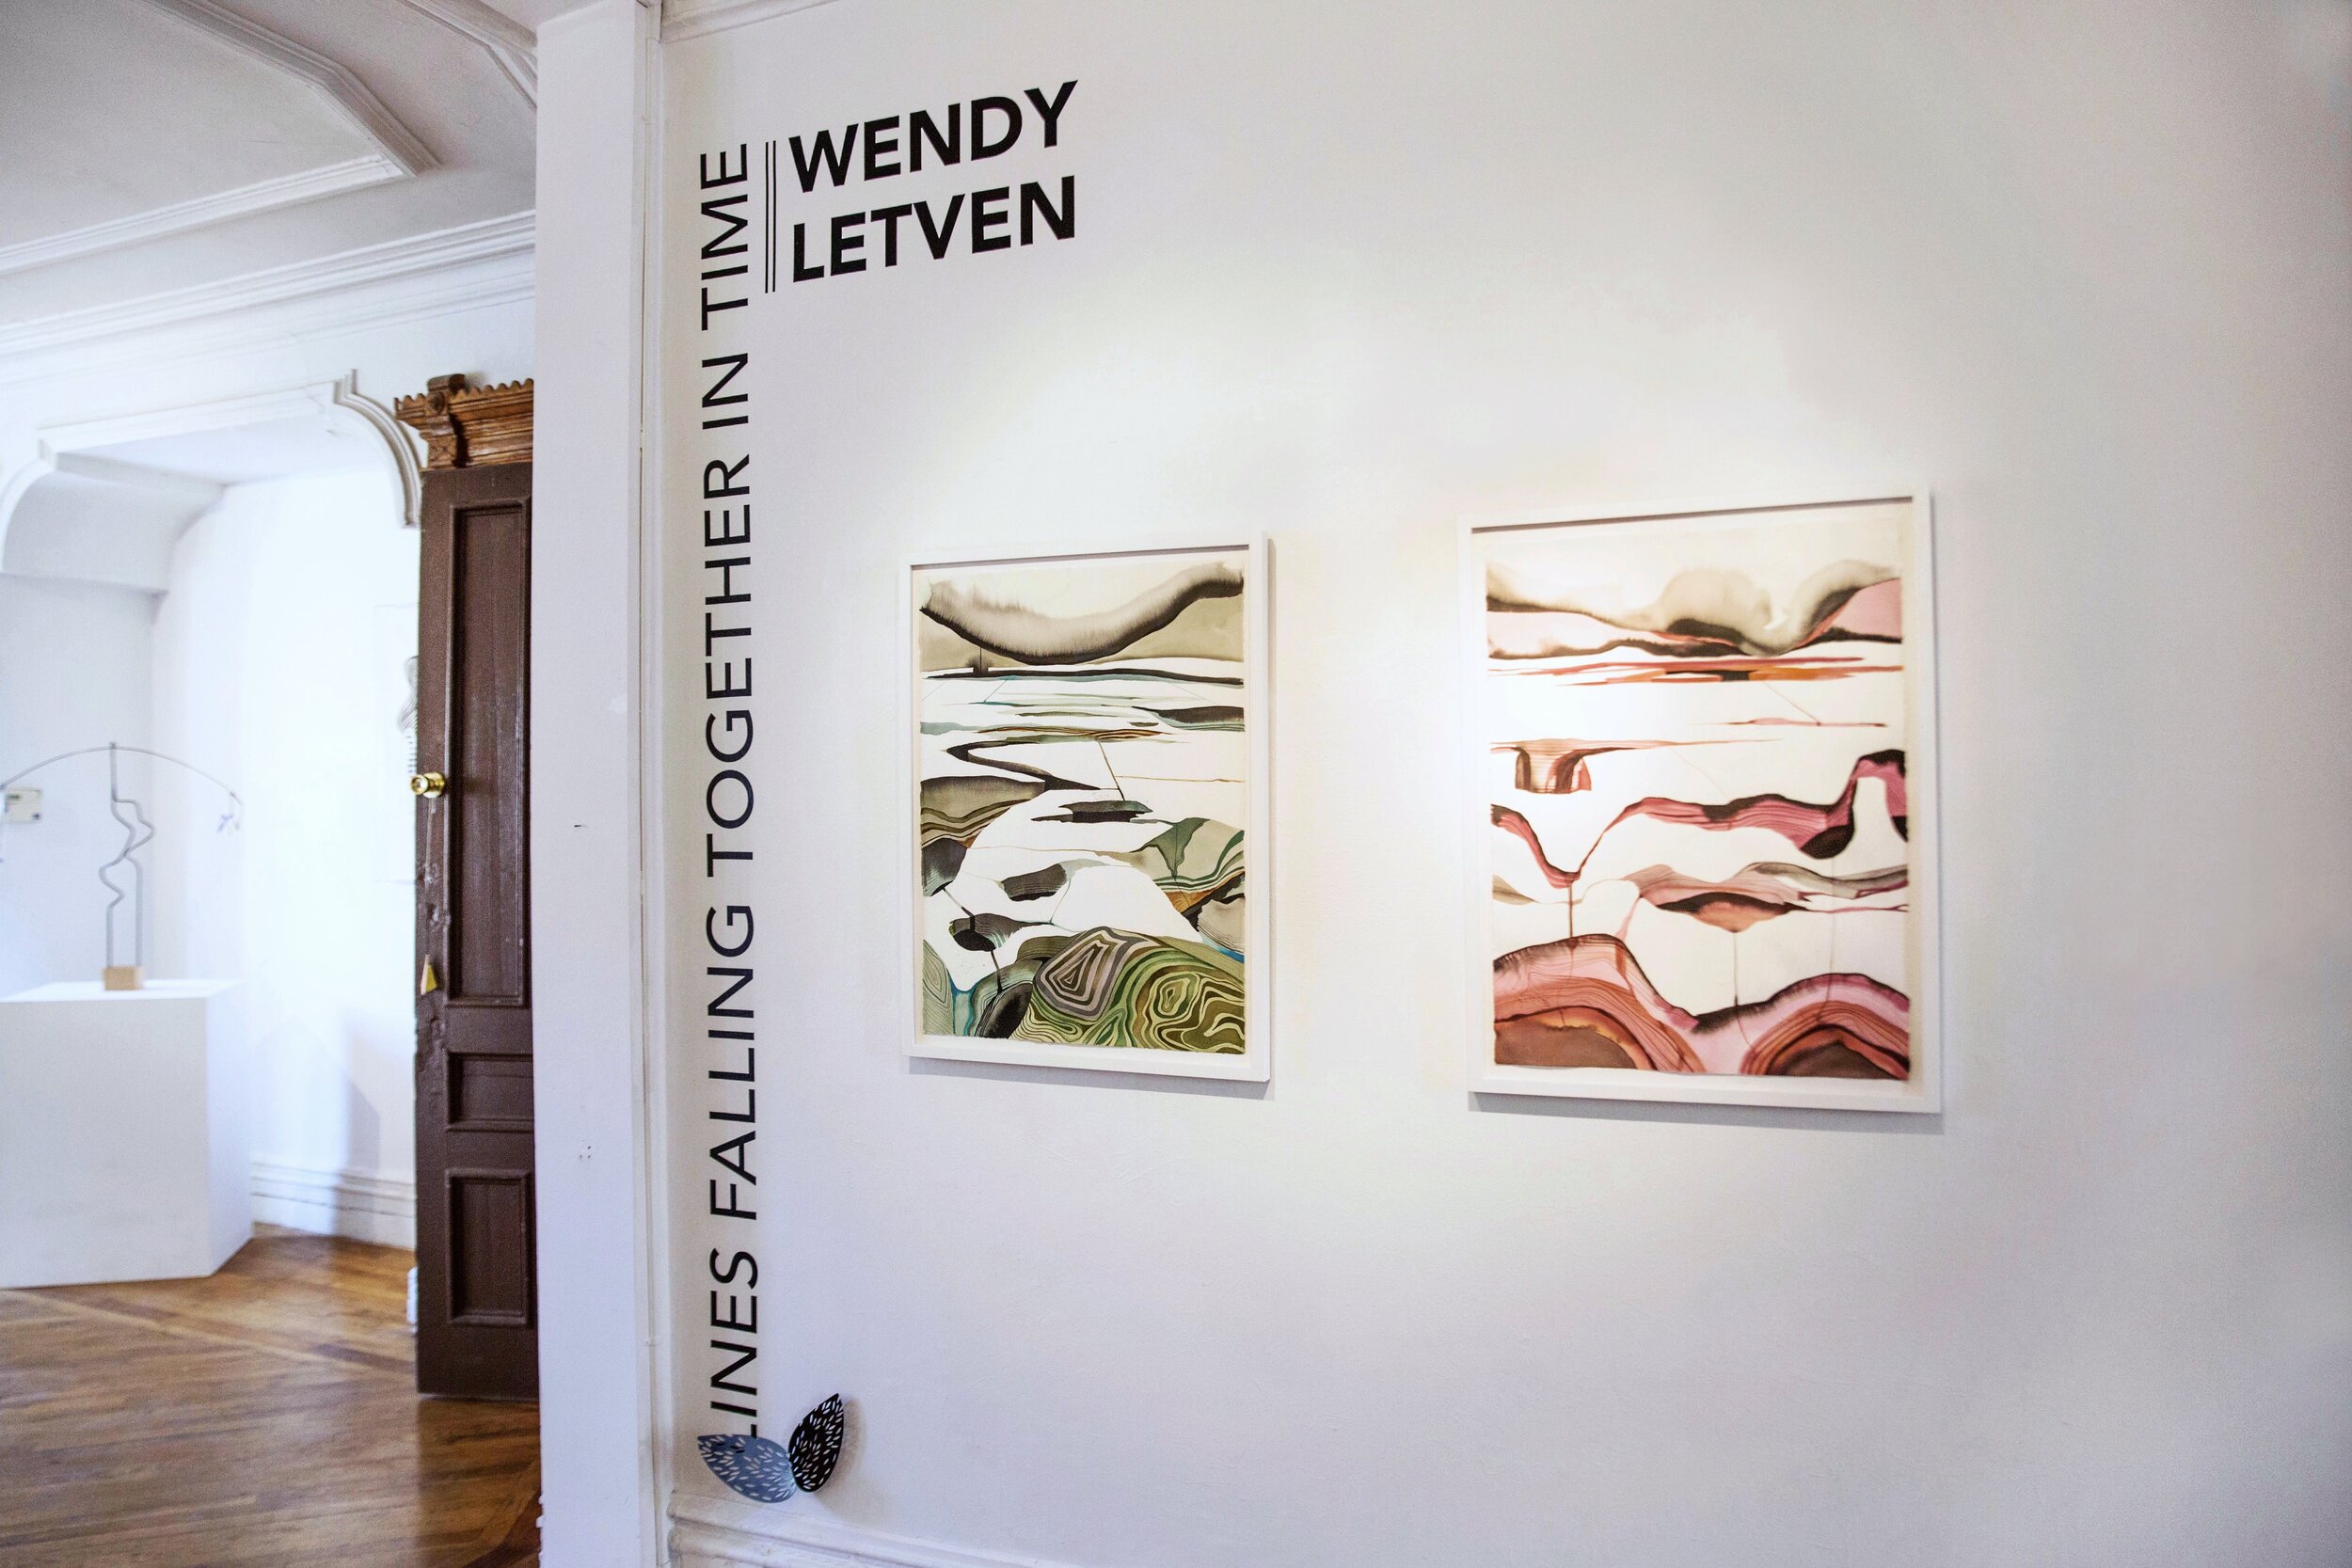   Wendy Letven: Lines Falling Together in Time  installation view. Photograph by Lynn Hai. ©Wendy Letven, courtesy Fou Gallery 